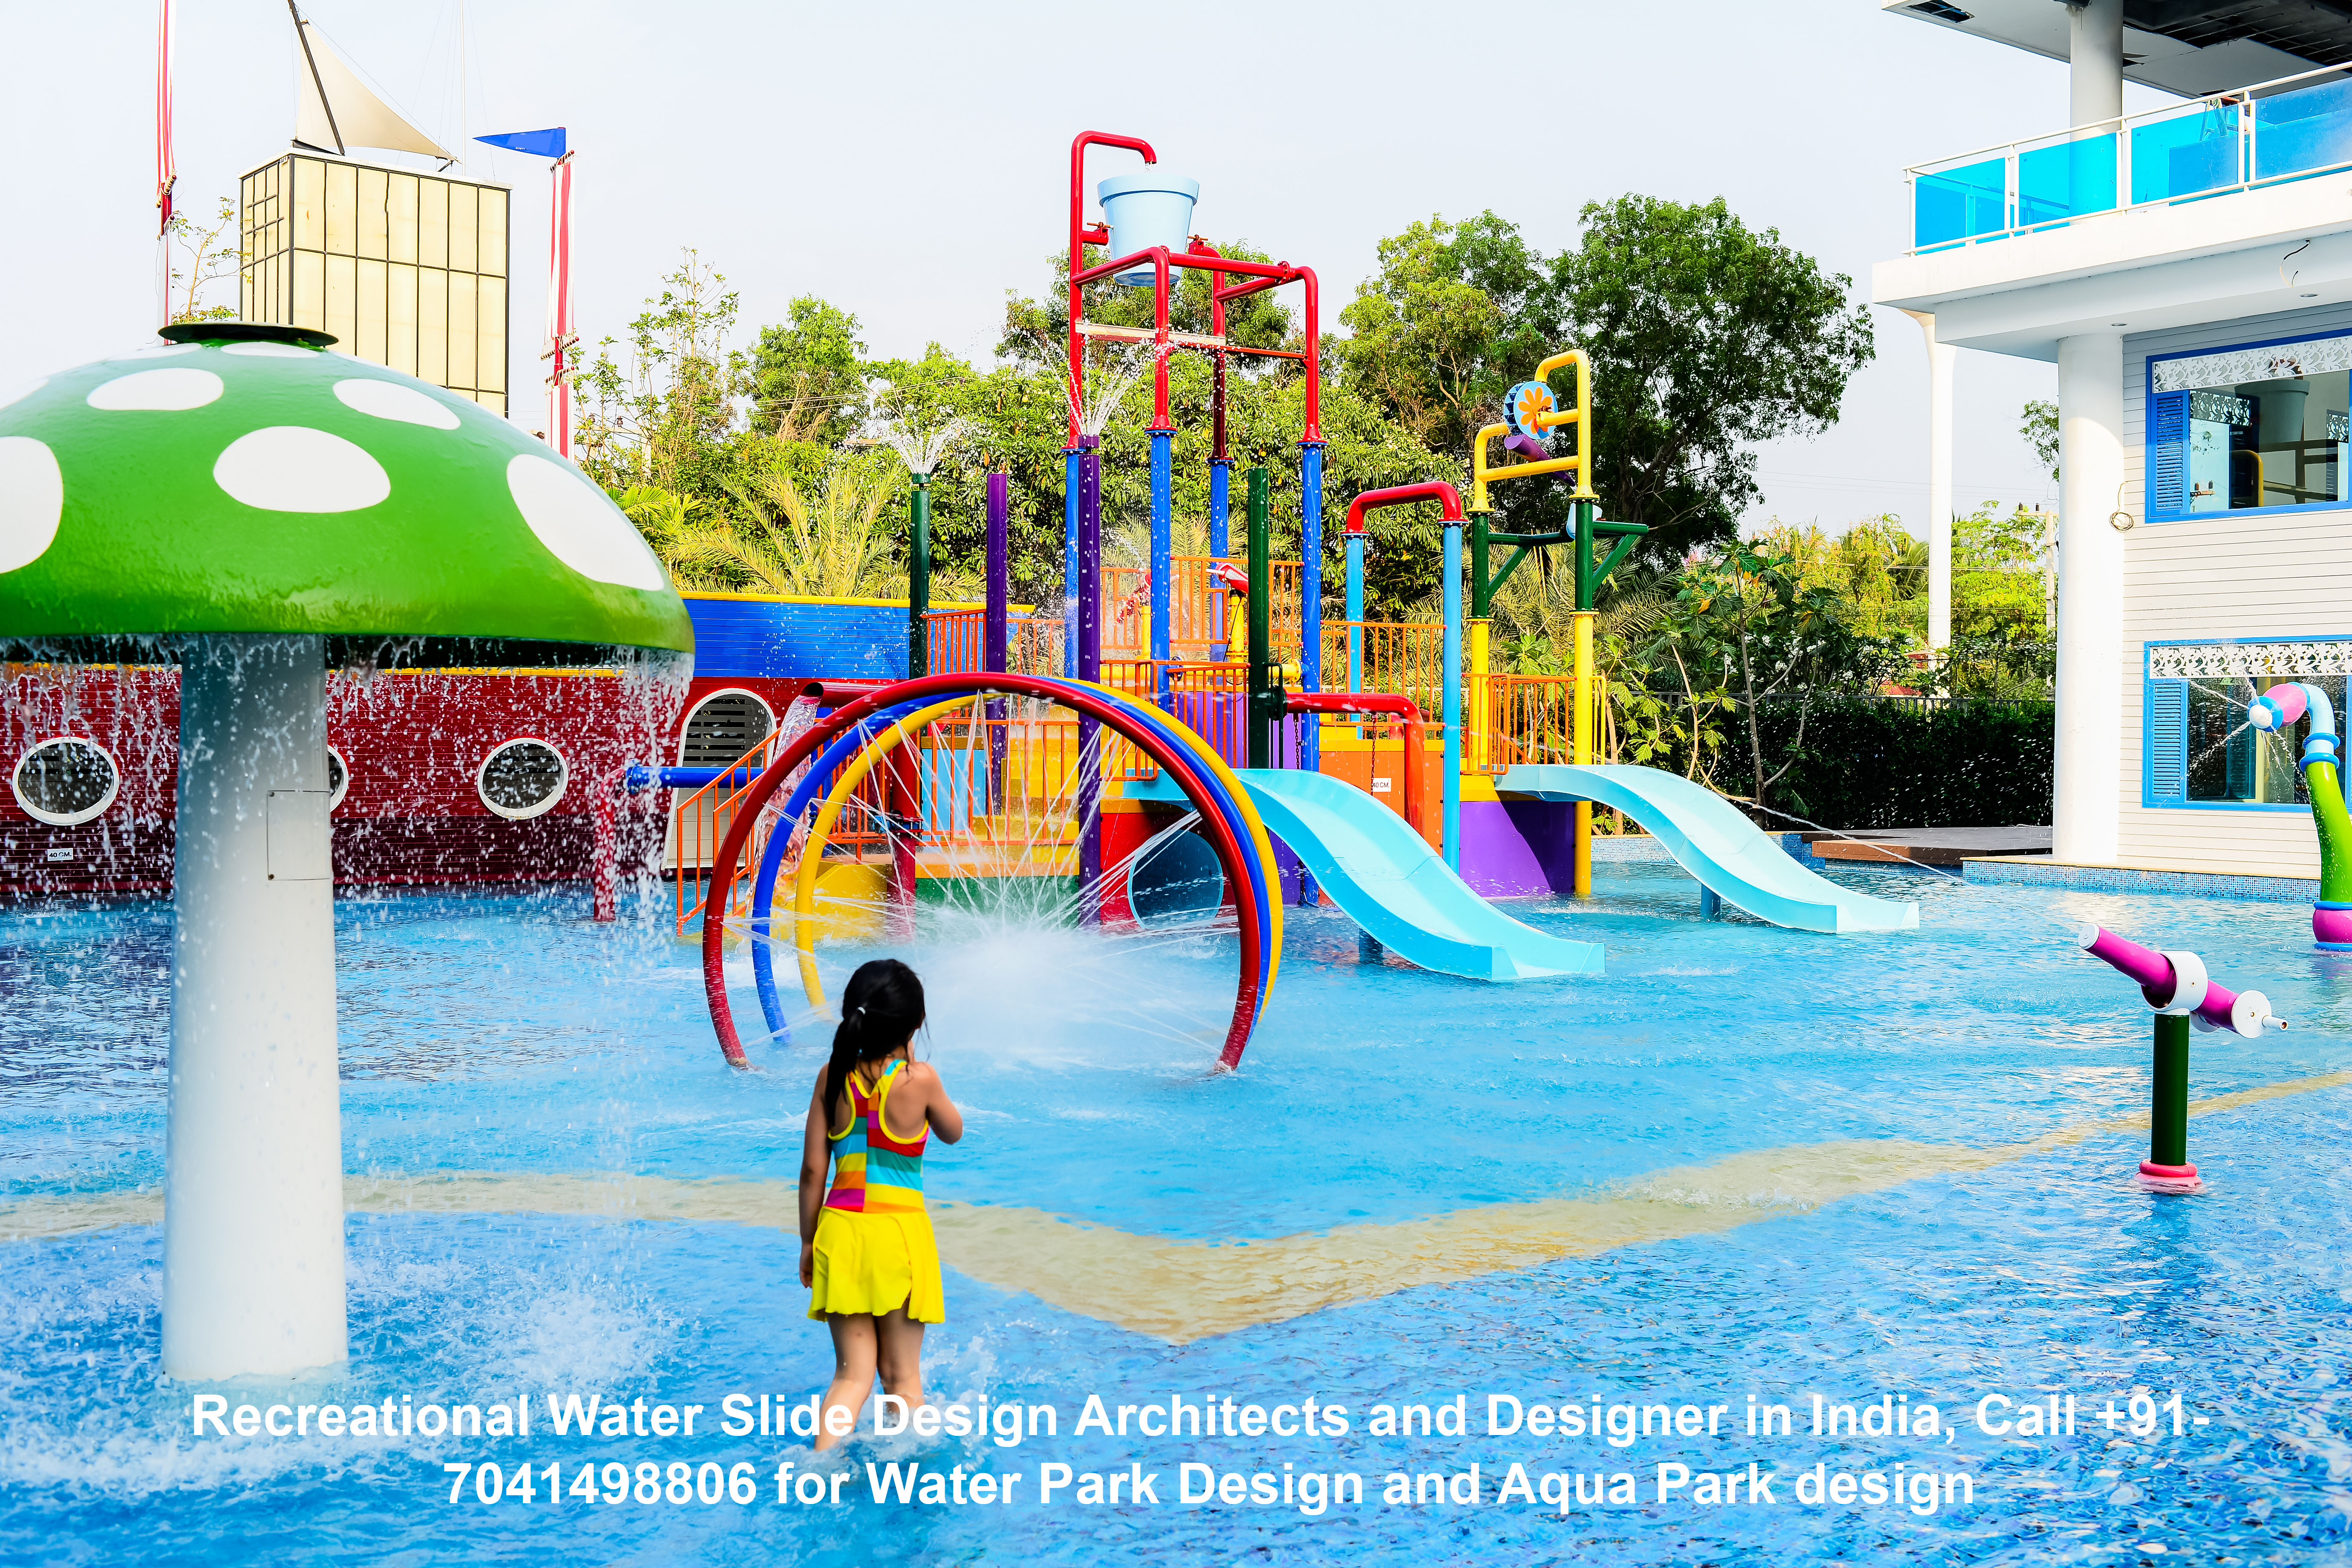 Recreational Water Slide Design Architects and Designer in India